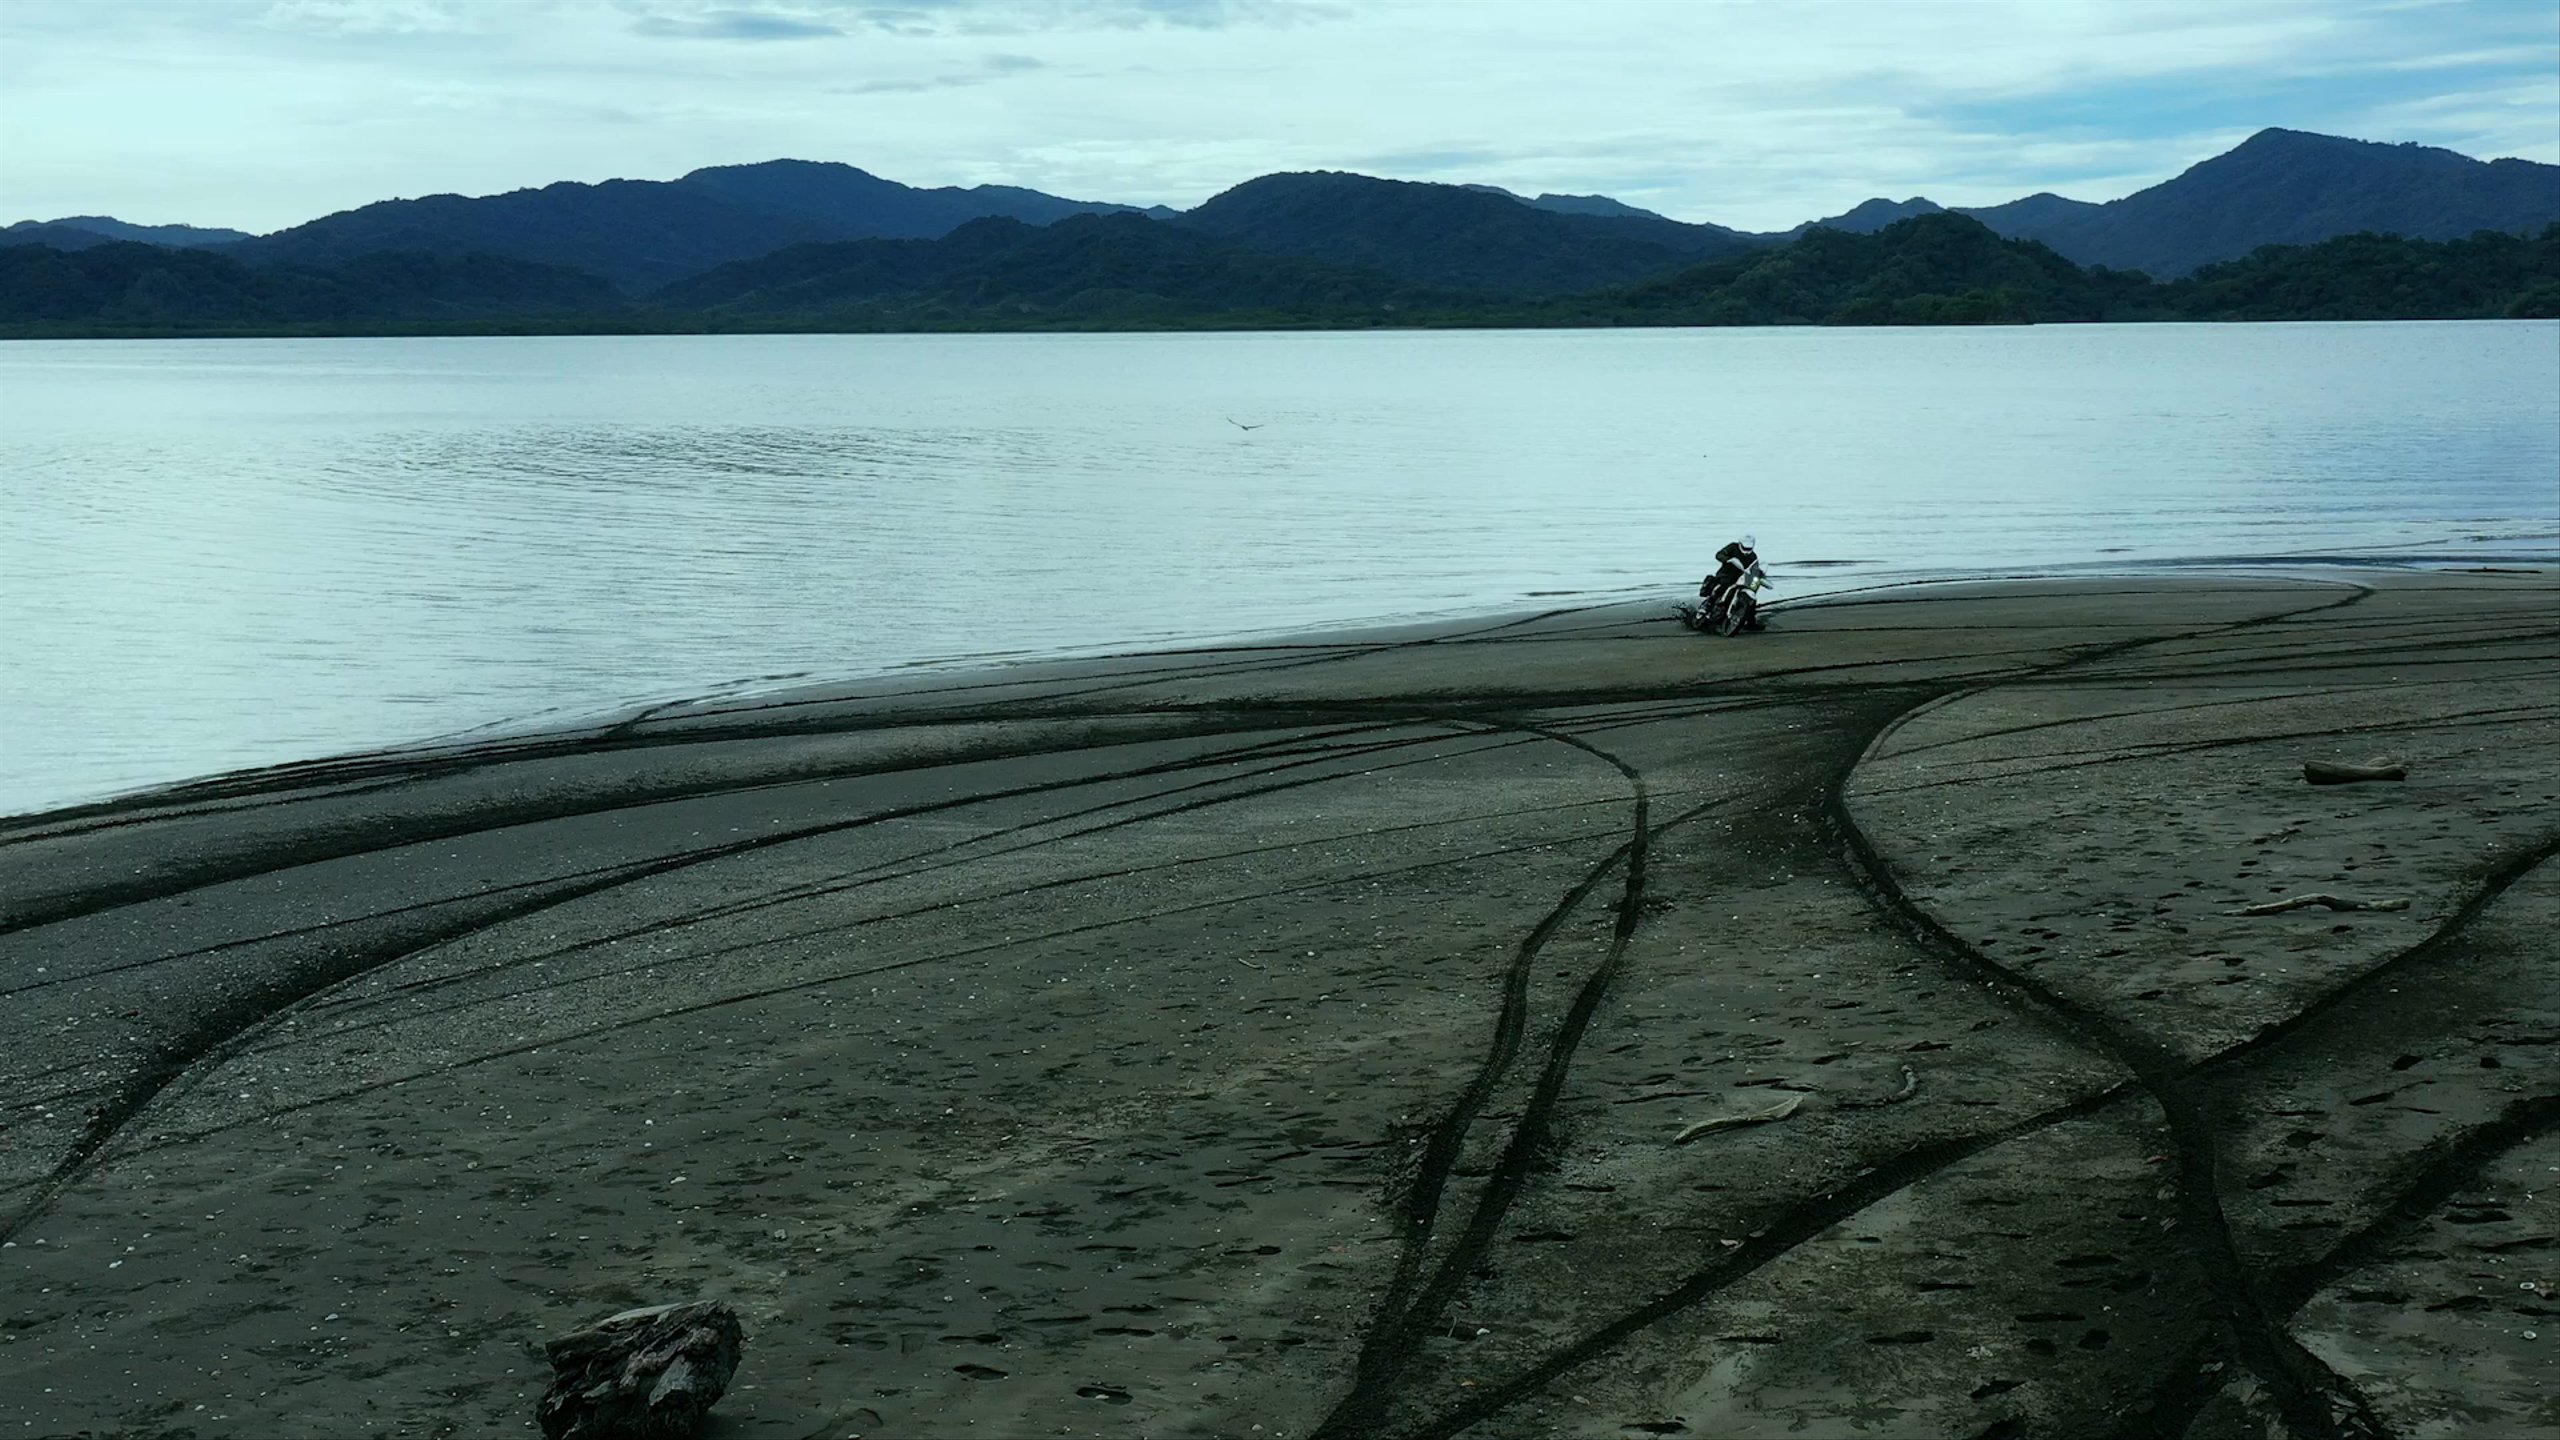 Man riding motorcycle on beach in Costa Rica